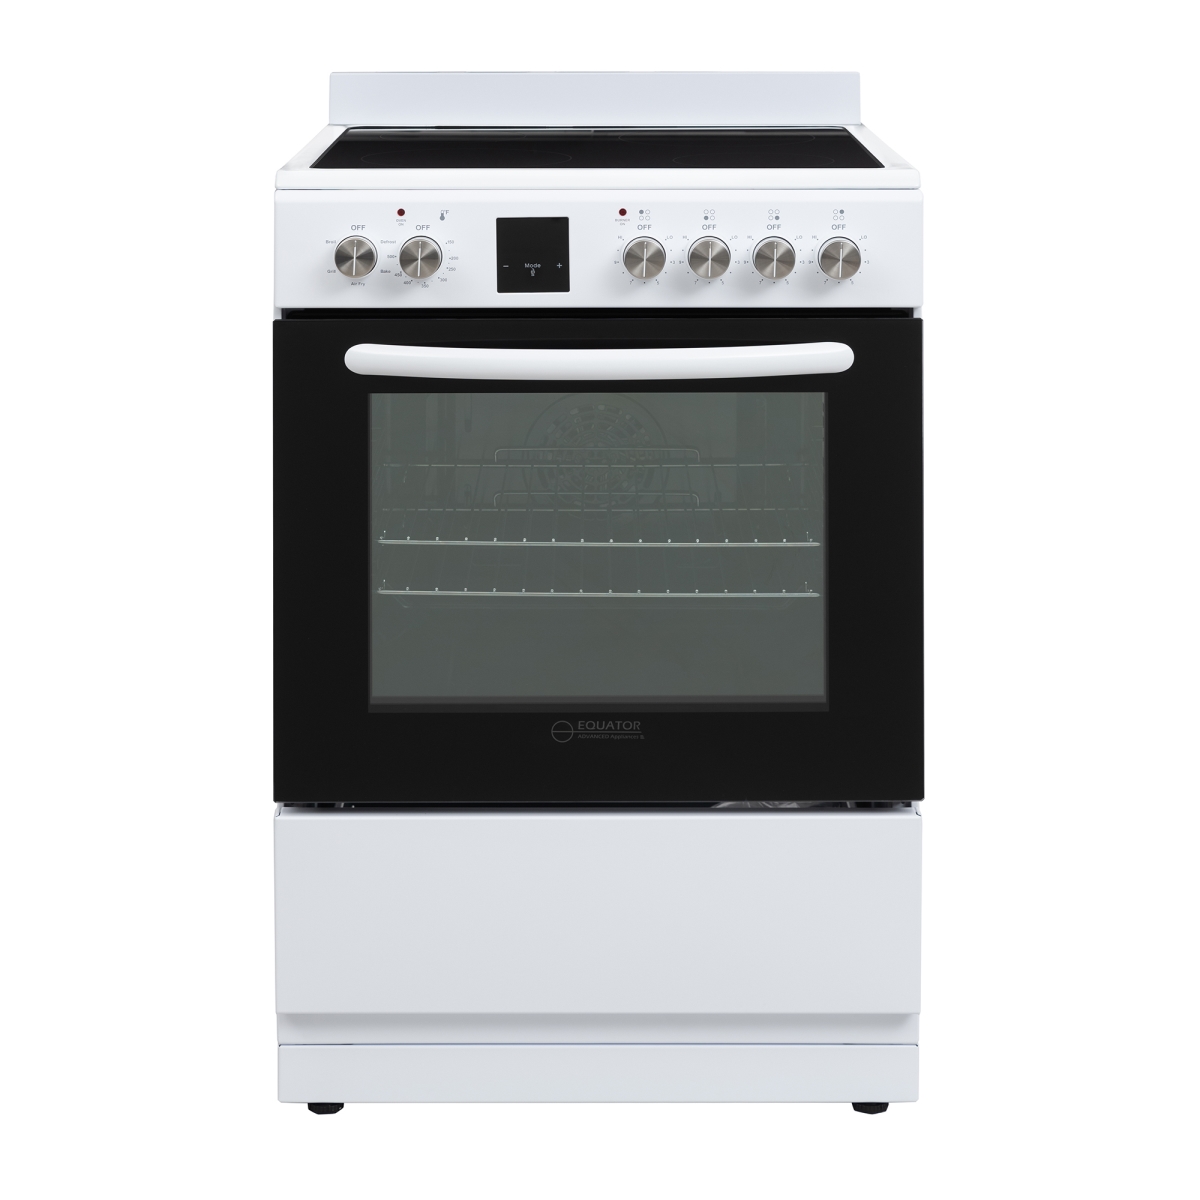 Picture of Equator Advanced Appliances ECR 244 White Equator 24 Freestanding Electric Cooking Range in White with Convection Oven